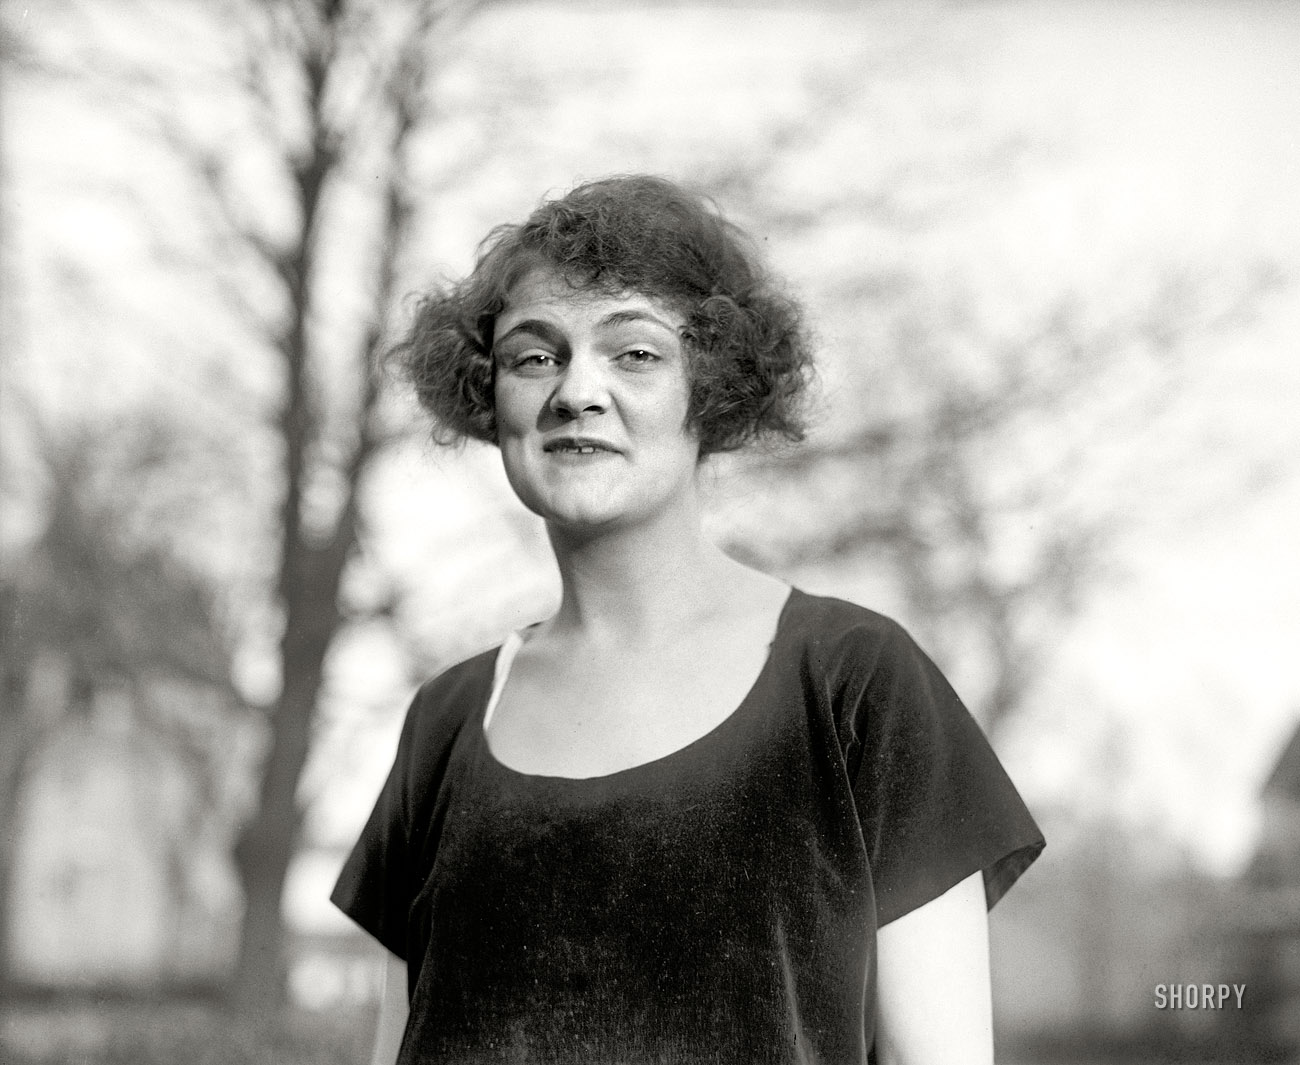 Washington, D.C., 1922. "Unidentified woman." Trying to tell us ... something. National Photo Company Collection glass negative. View full size.